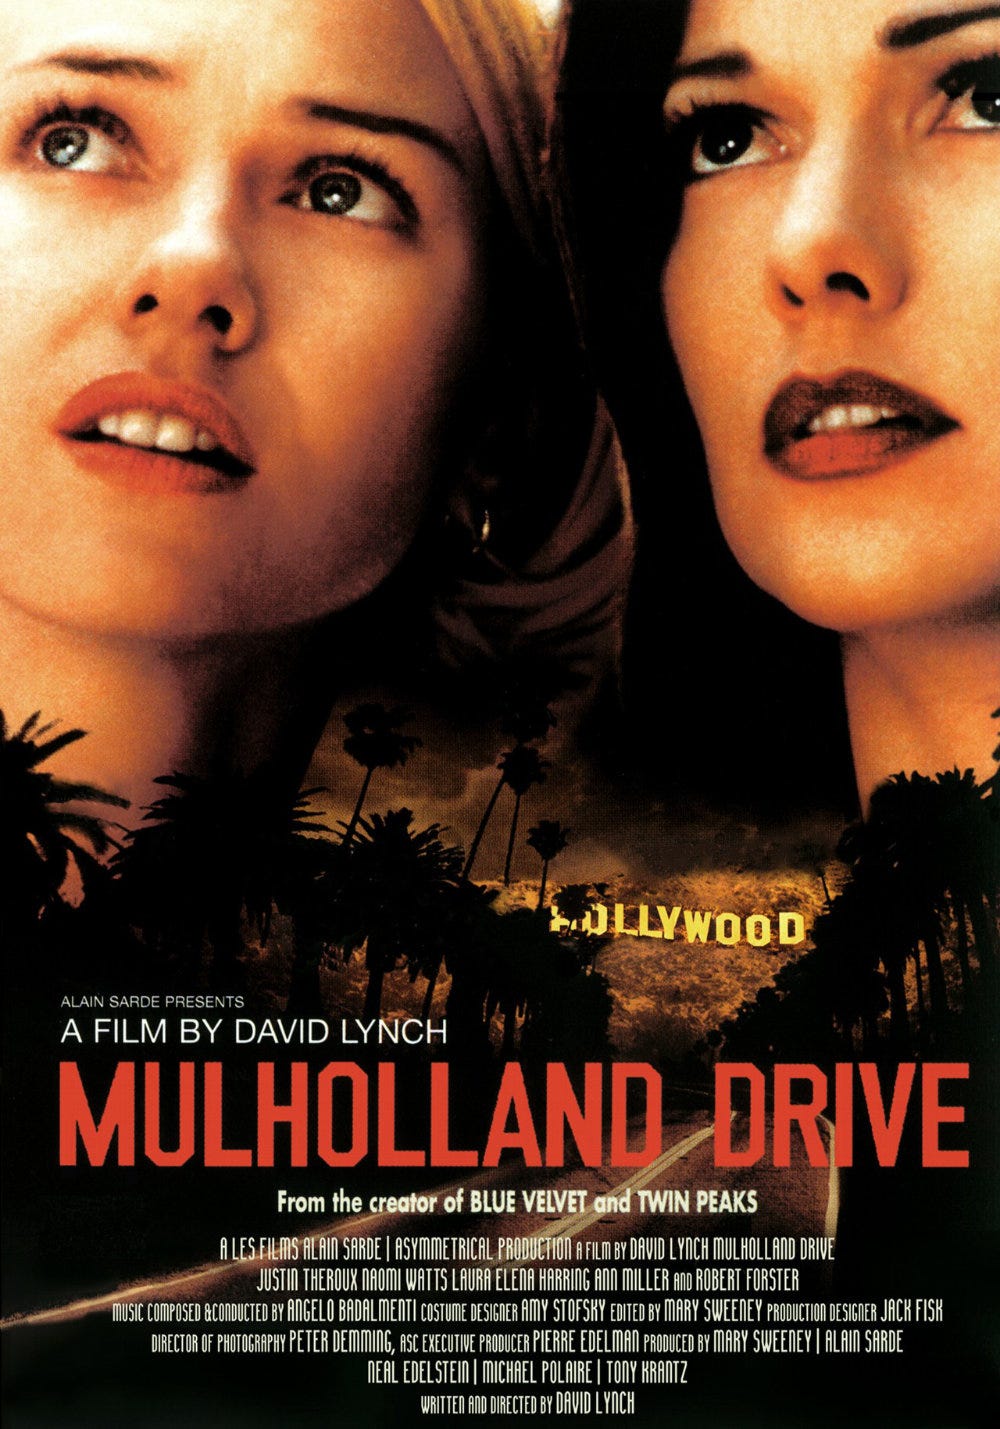 A poster for the David Lynch film Mulholland Drive, which pictures stars Naomi Watts and Laura Elena Herring looking up and to the right with serious expressions, superimposed over a nighttime road and the Hollywood sign